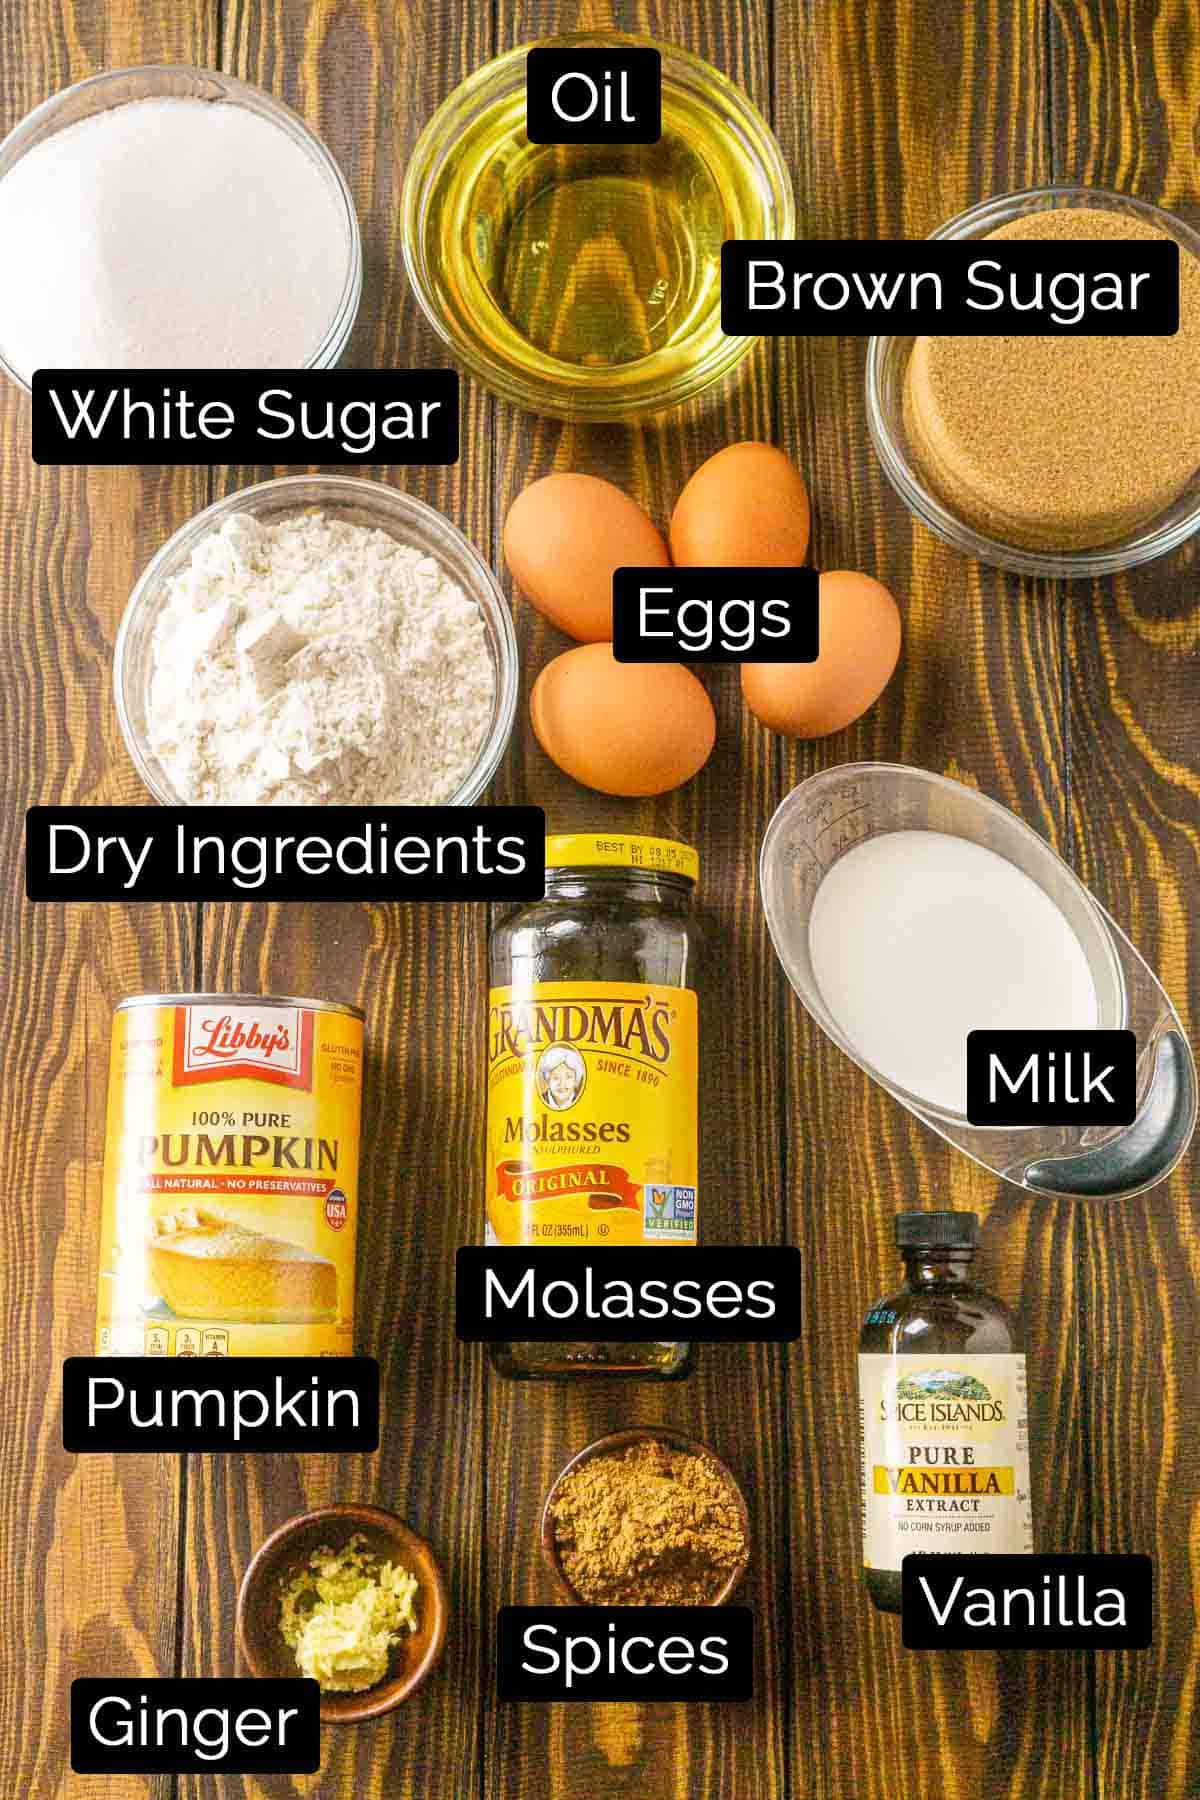 The pumpkin gingerbread ingredients on a wooden board with labels.